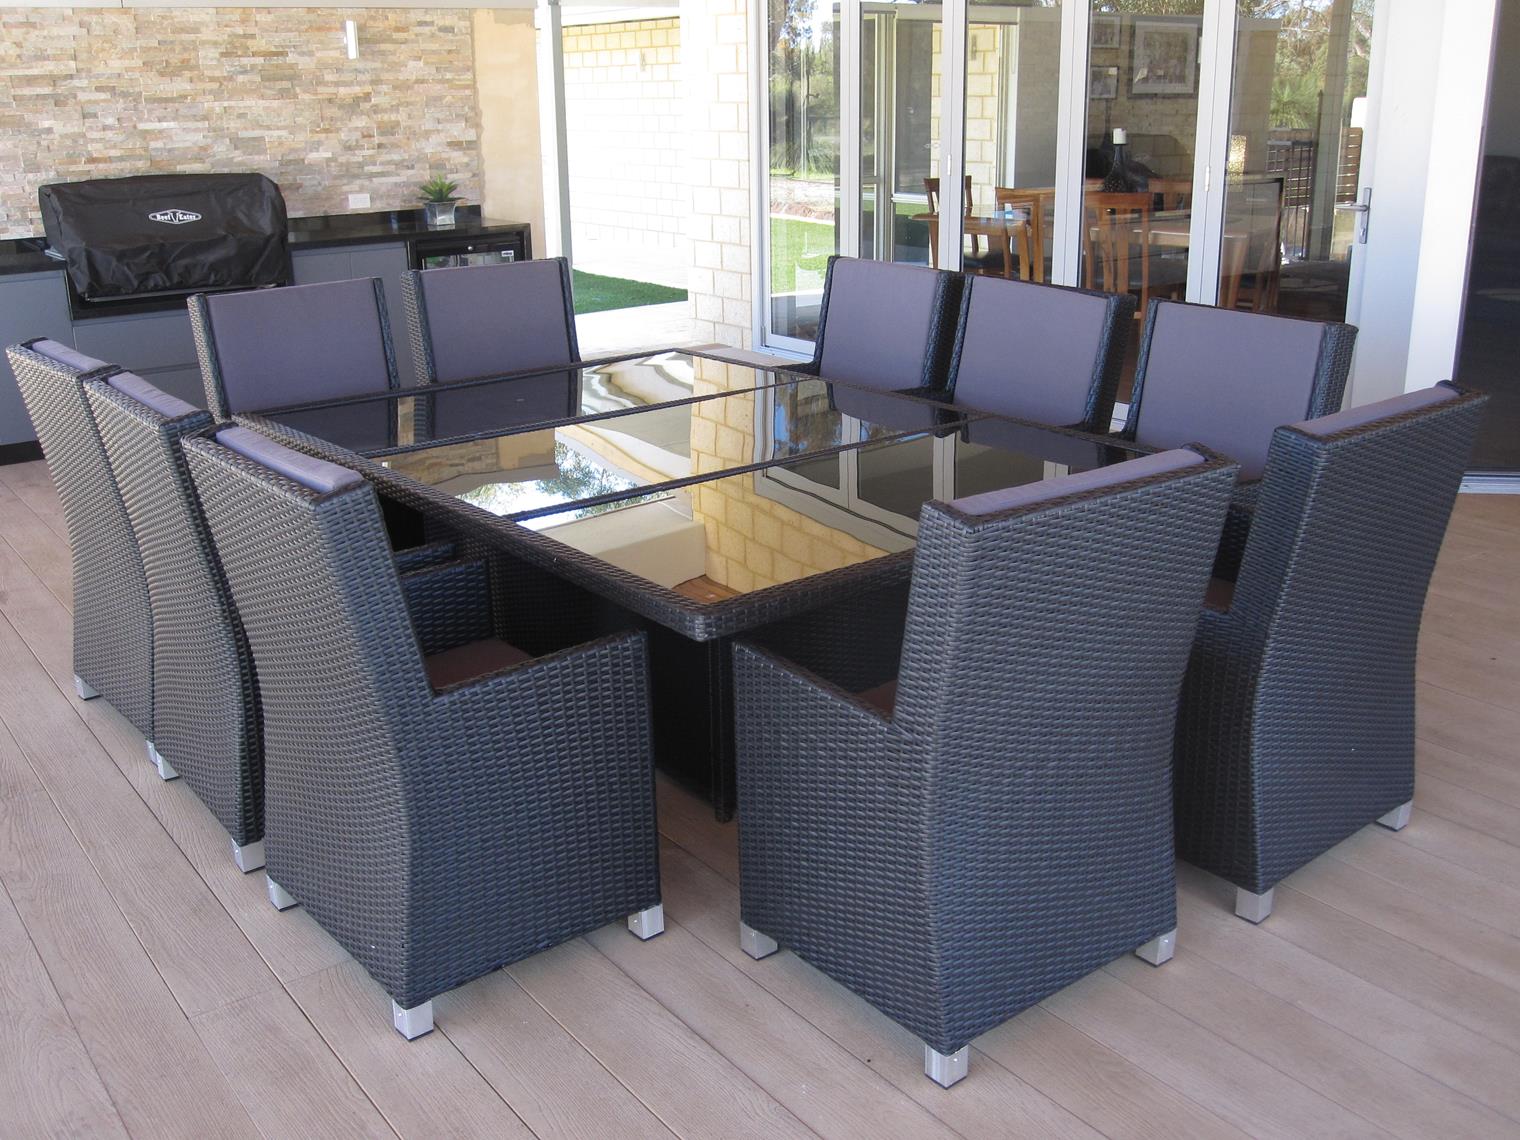 outdoor furniture perth - goodworksfurniture SWFMBNW